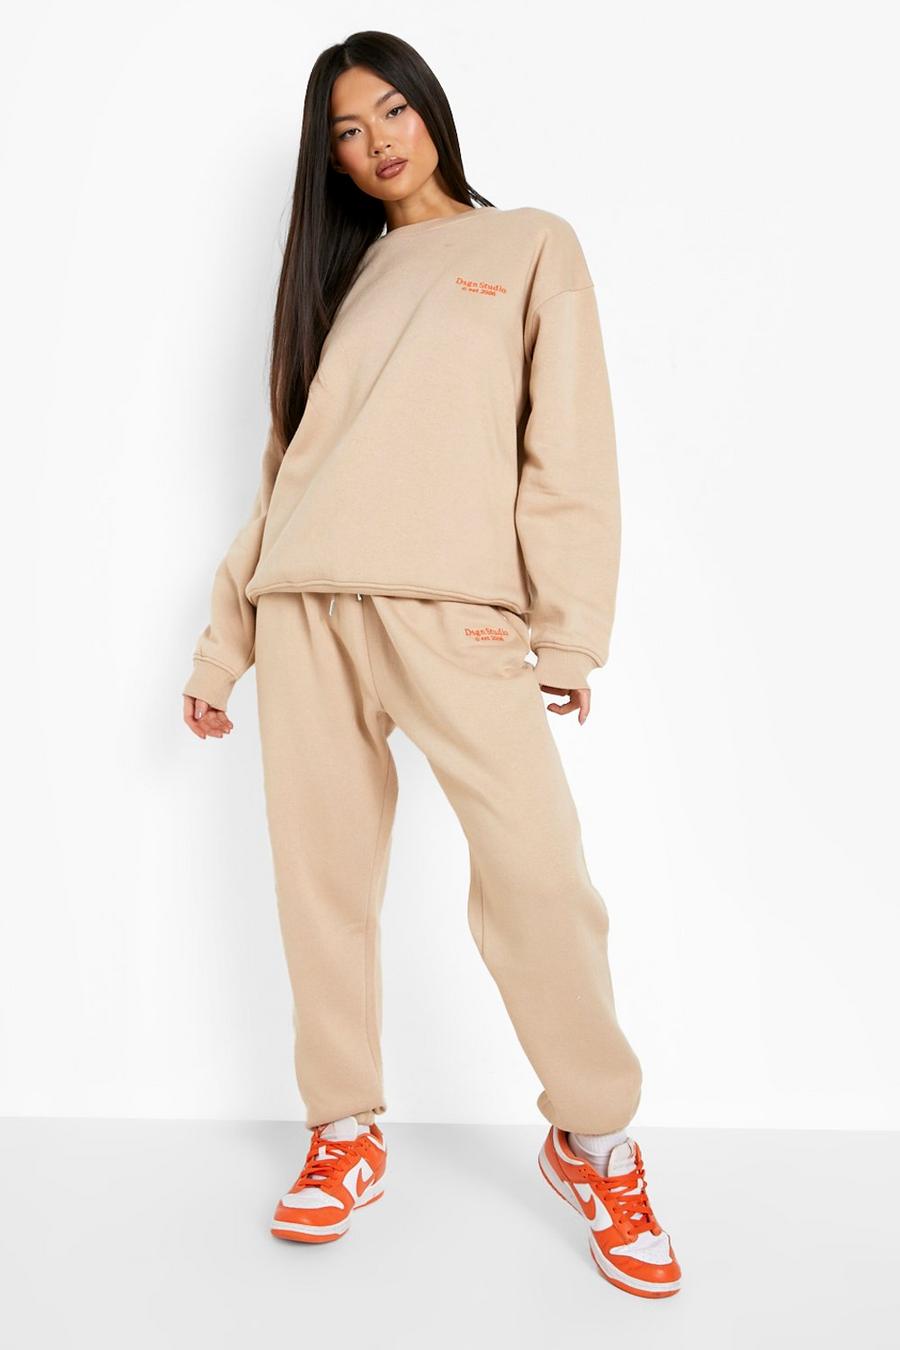 Stone beige Dsgn Studio Embroidered Sweater Tracksuit 